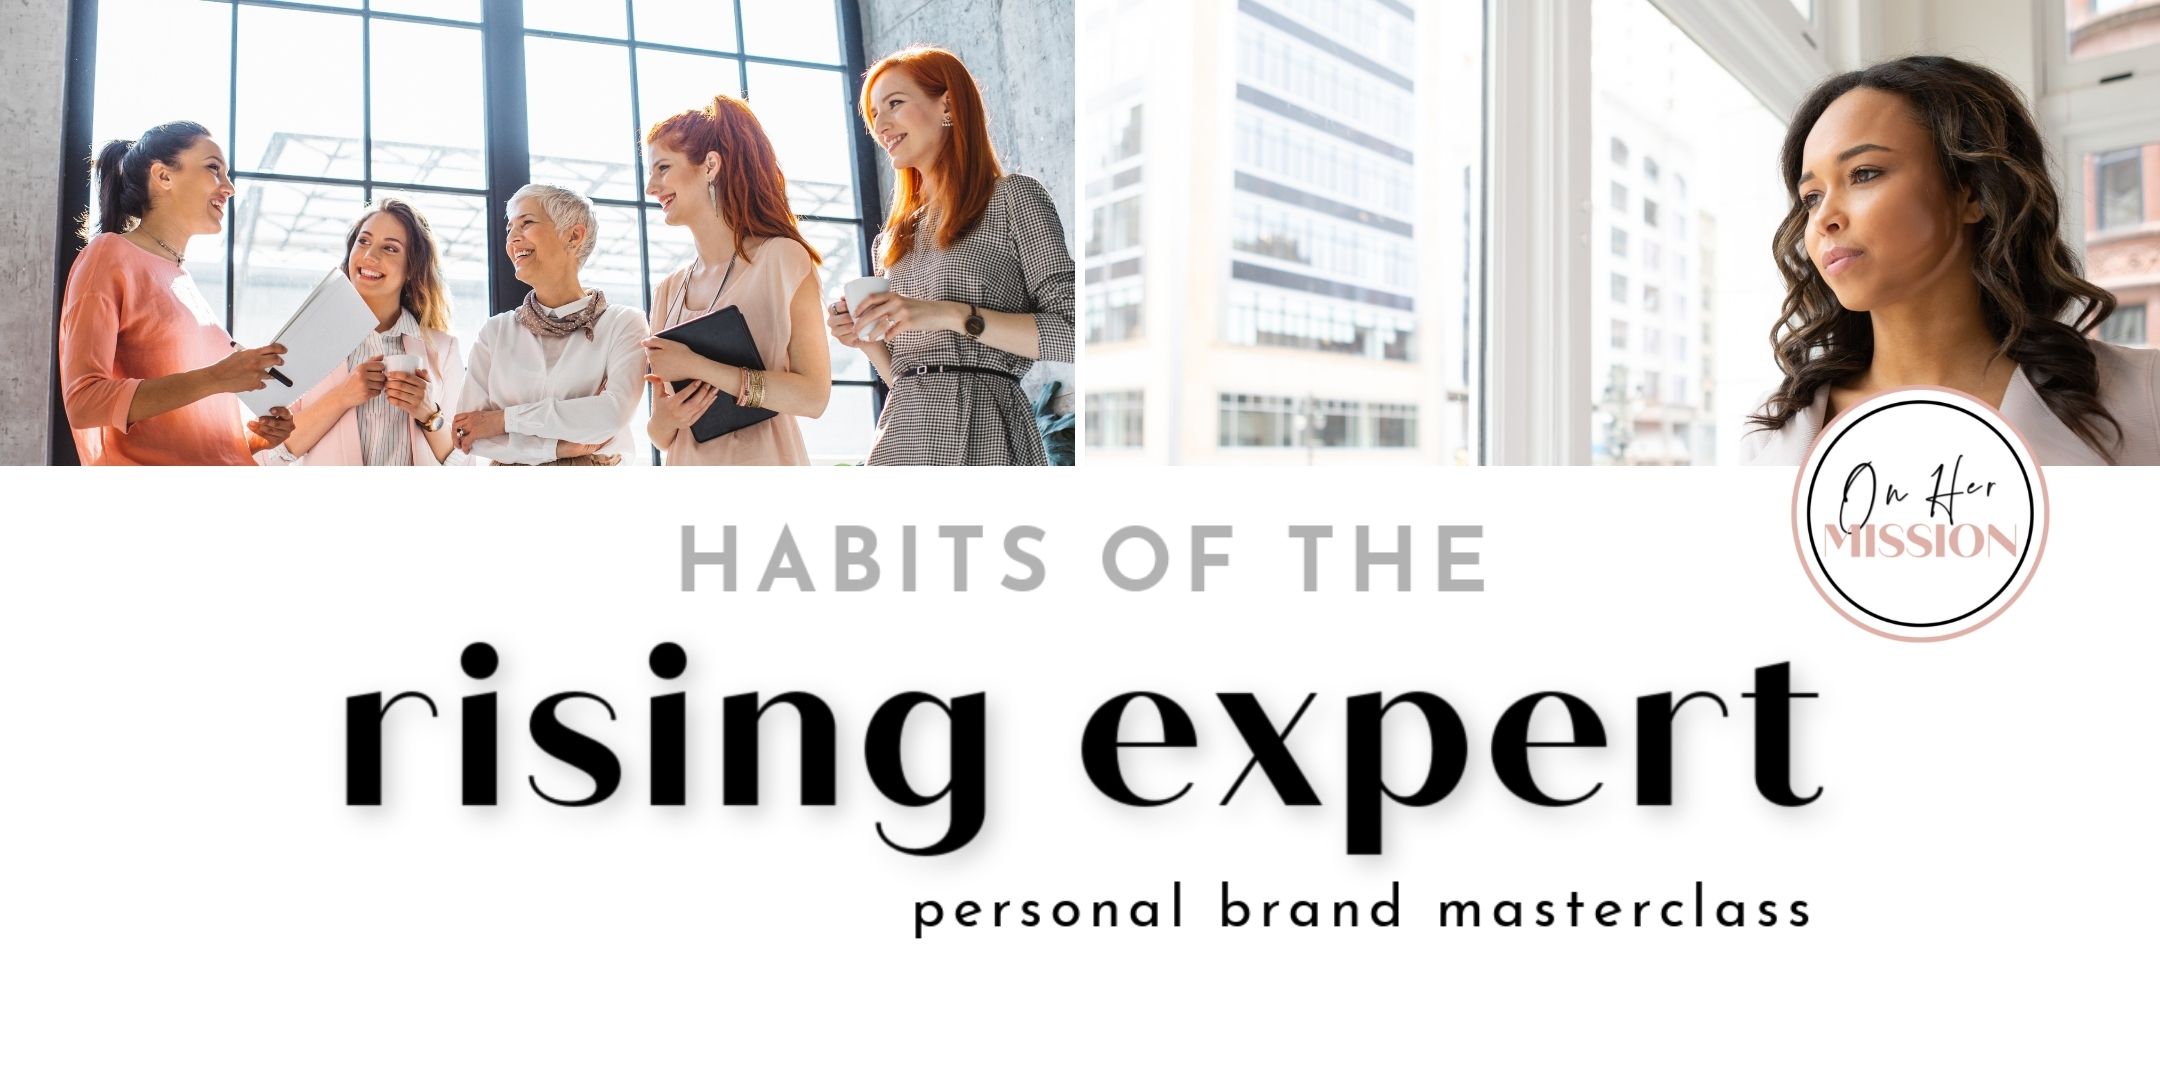 Habits of the Rising Expert Personal Brand Masterclass